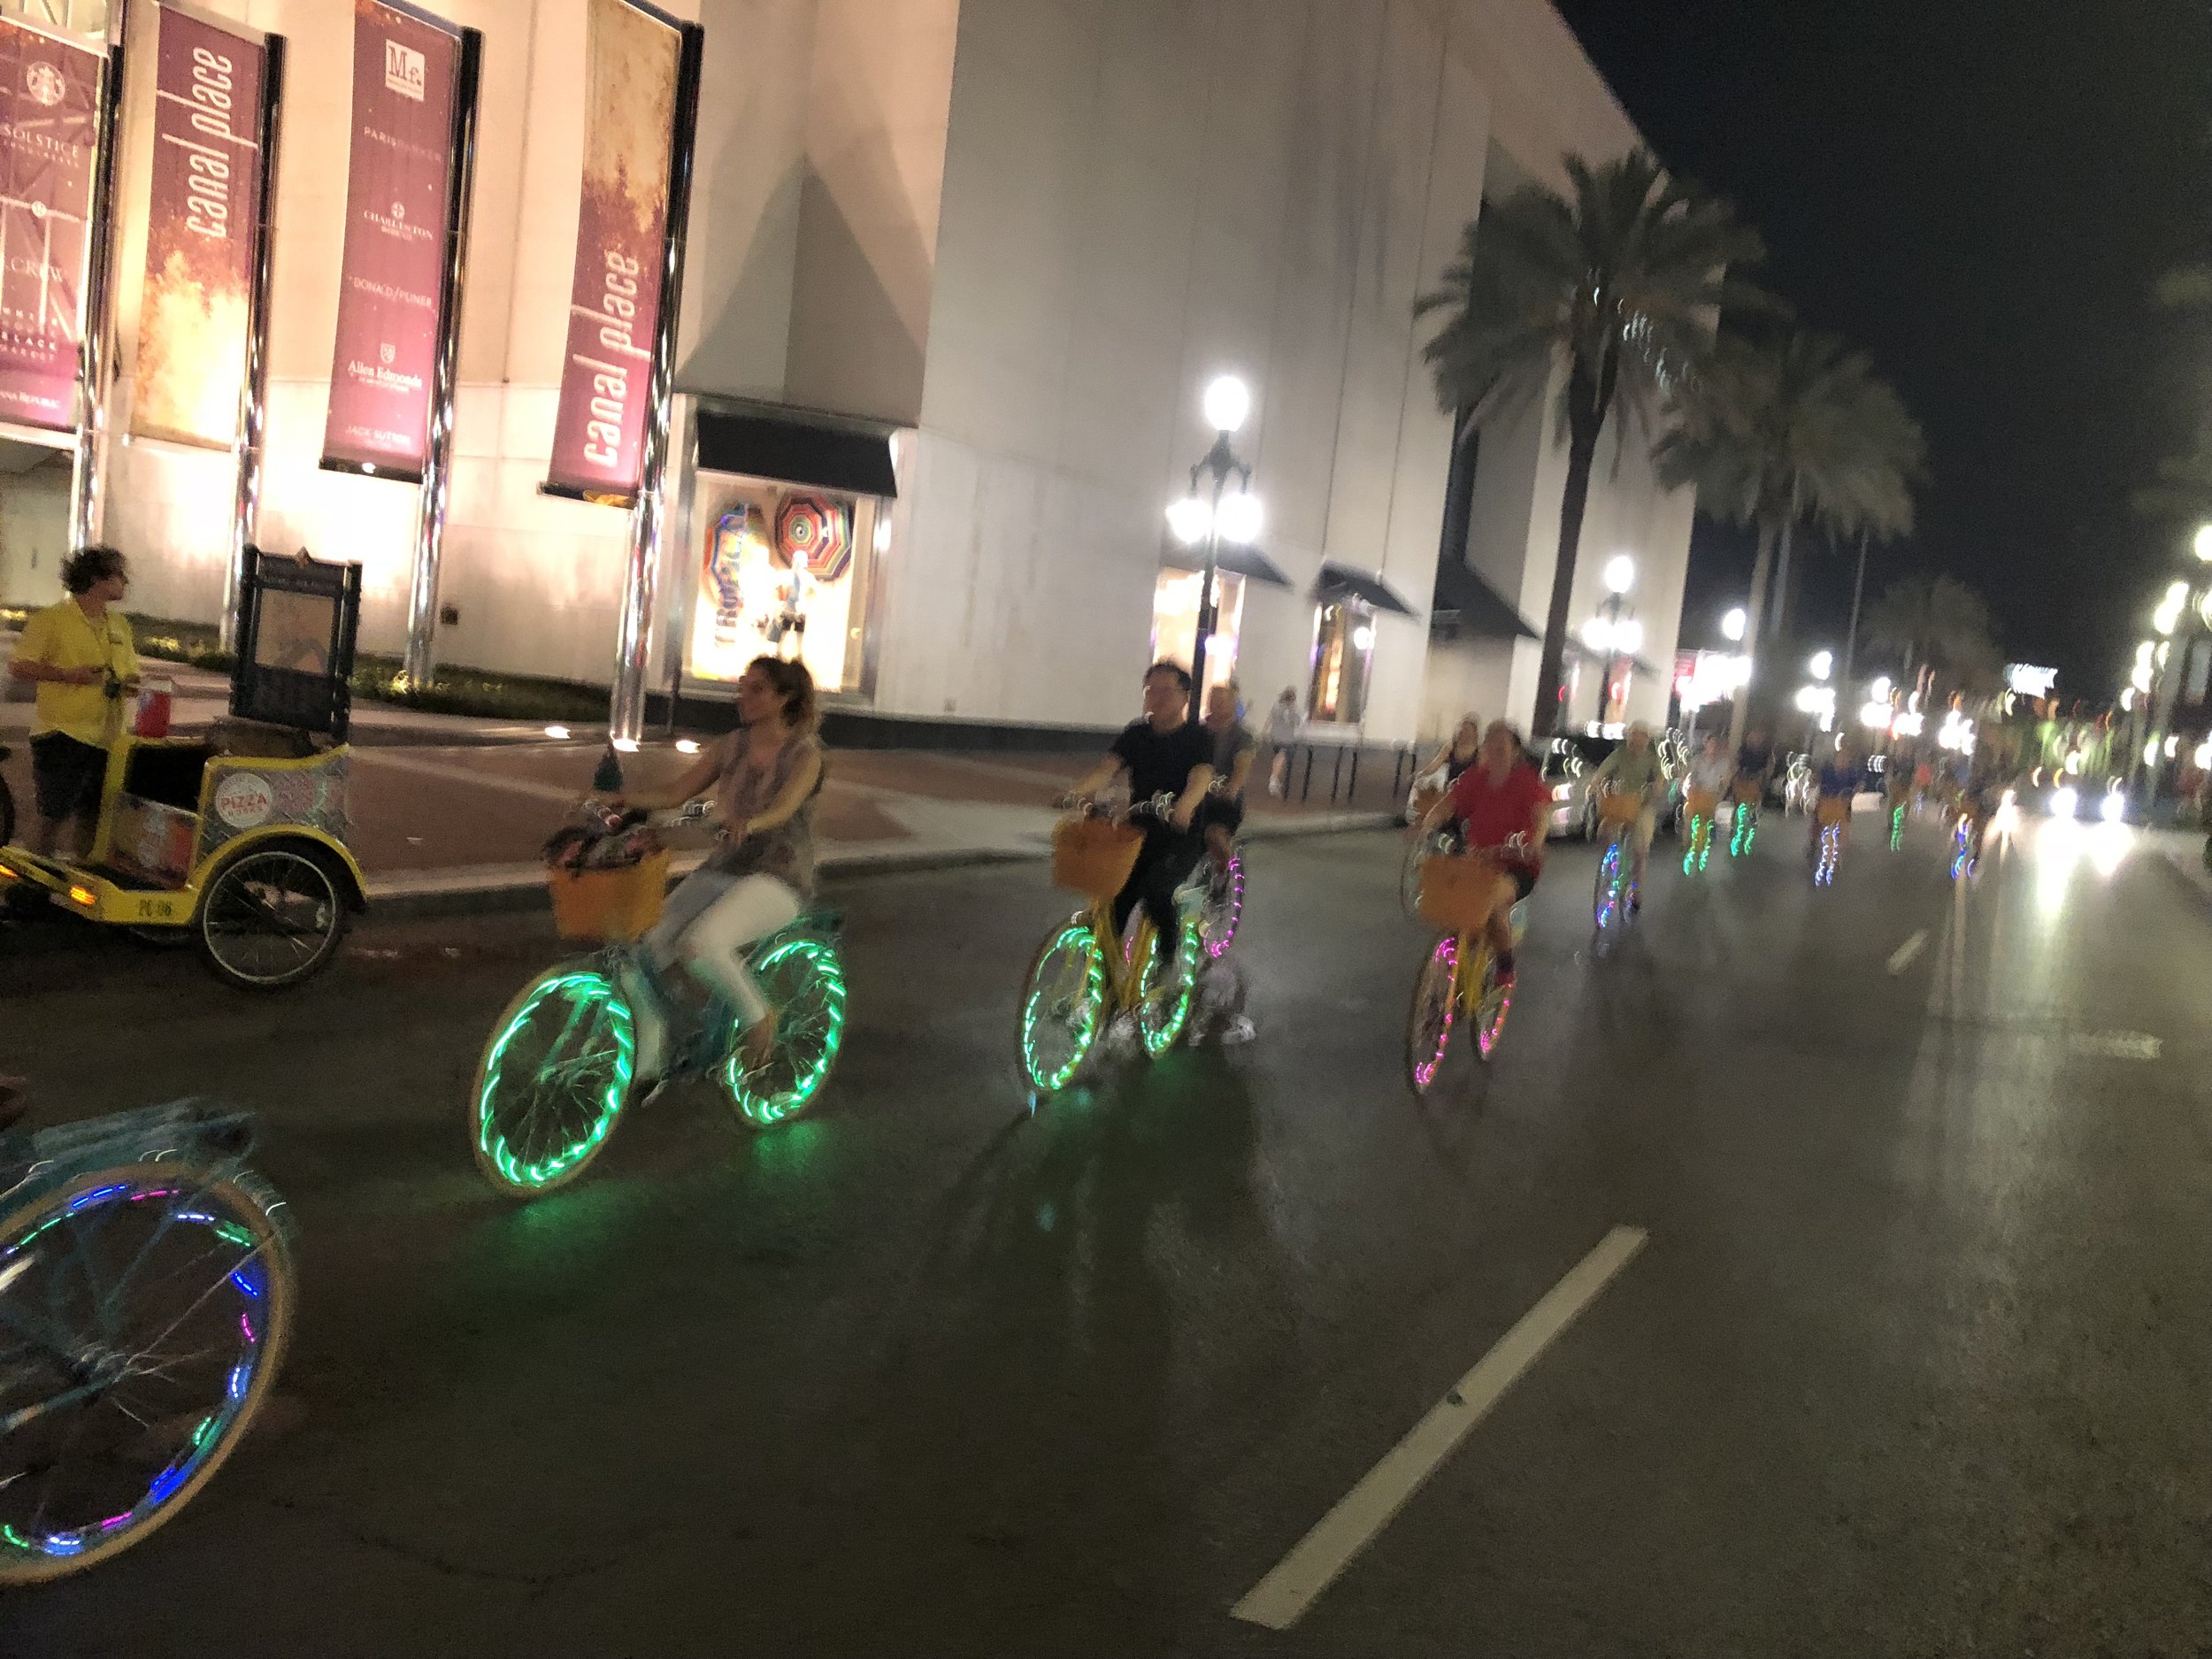  Our social ride is a party on two wheels. We offer the primer night ride of Nola. Be the lights of the city on our professionally maintained bikes. Our wheels are blinged out with lights and we have amplified music to boot. Don’t miss out on this am